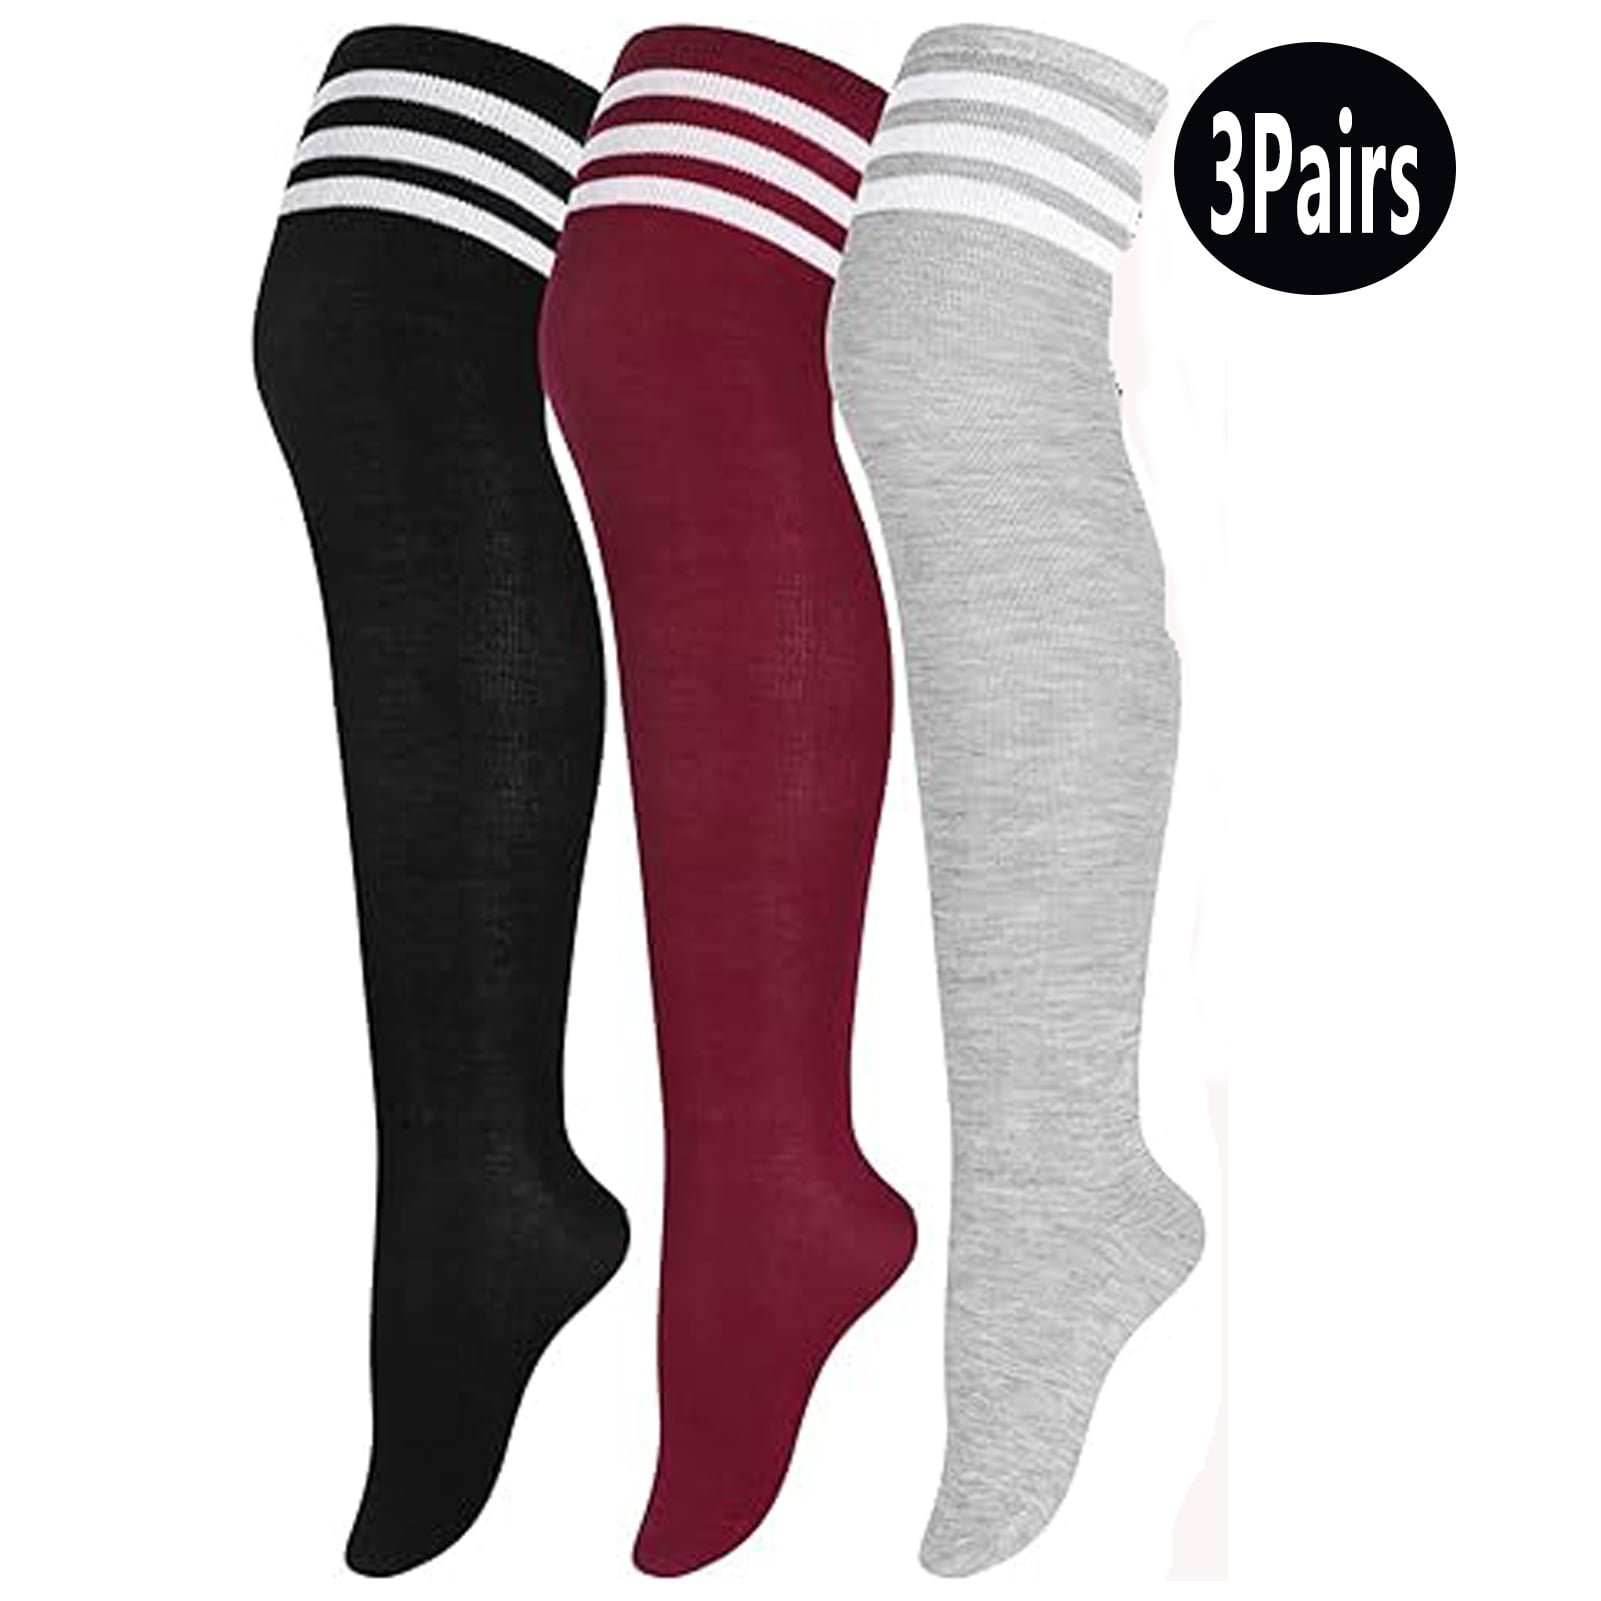 3 Pairs Plus Size Over Knee Socks Women Warm Thigh High Stockings for ...